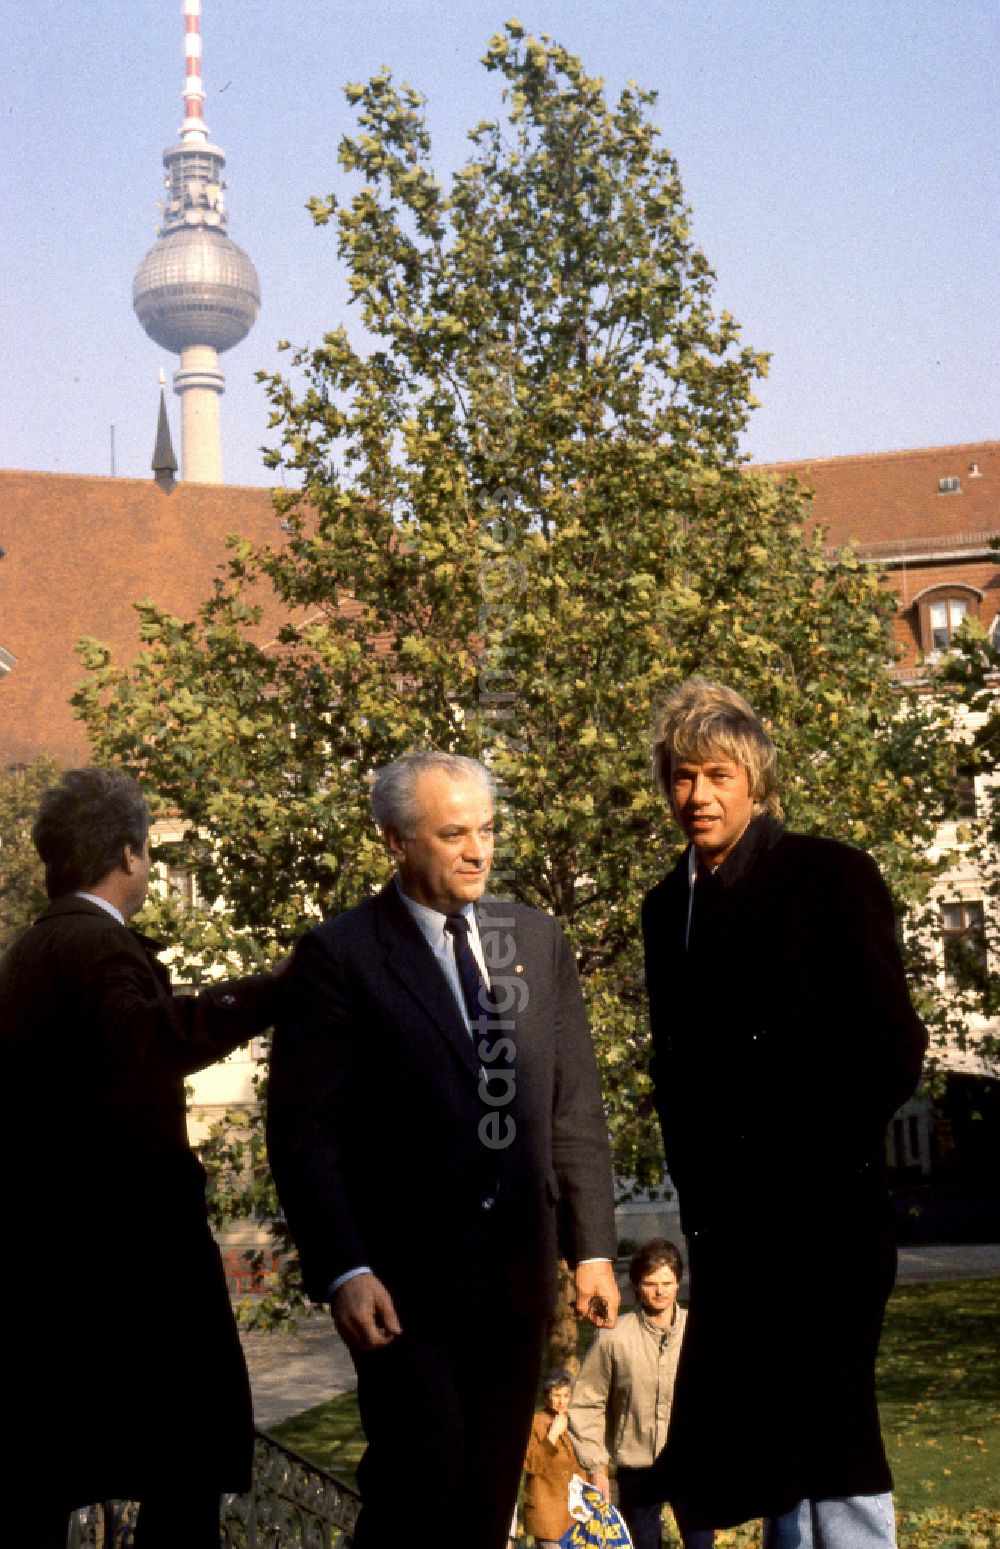 GDR image archive: Berlin - Singer Roland Kaiser in the Nikolai Quarter in Berlin-Mitte accompanied by Hermann Falk, Director of the Artists' Agency of the GDR